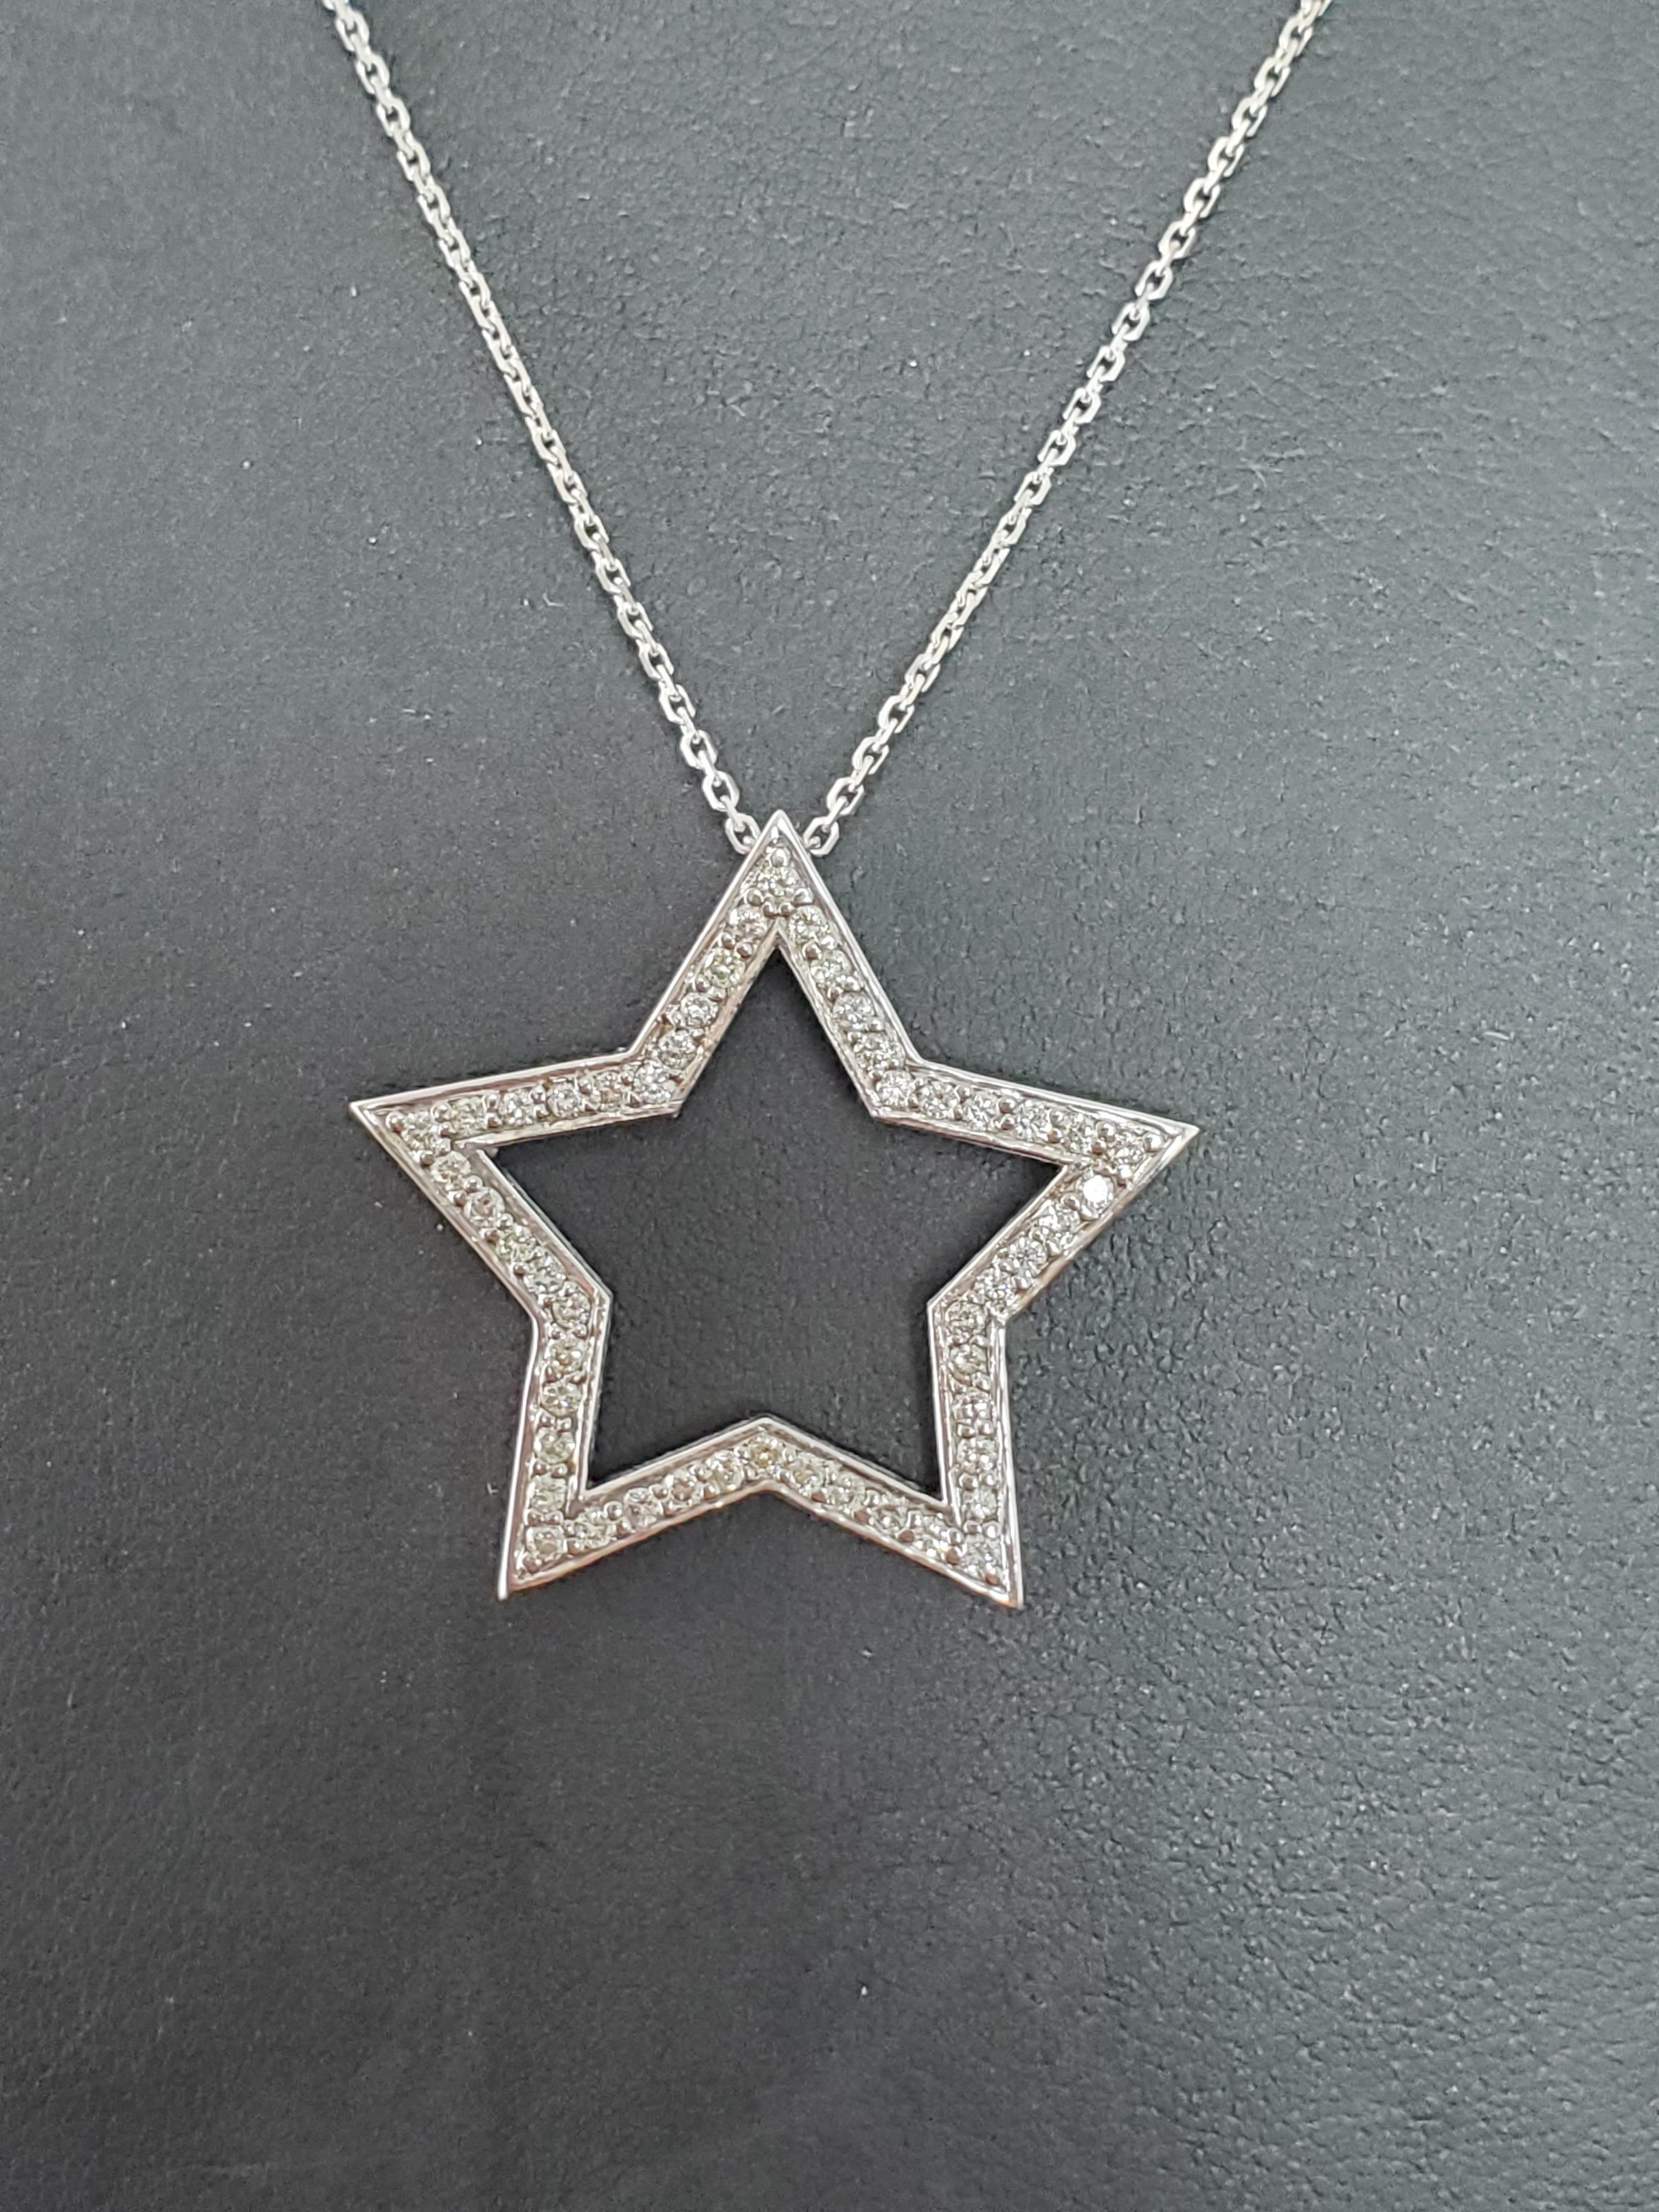 Diamond Star Stencil Cutout Necklace .60cttw 14k White Gold In New Condition For Sale In Sugar Land, TX